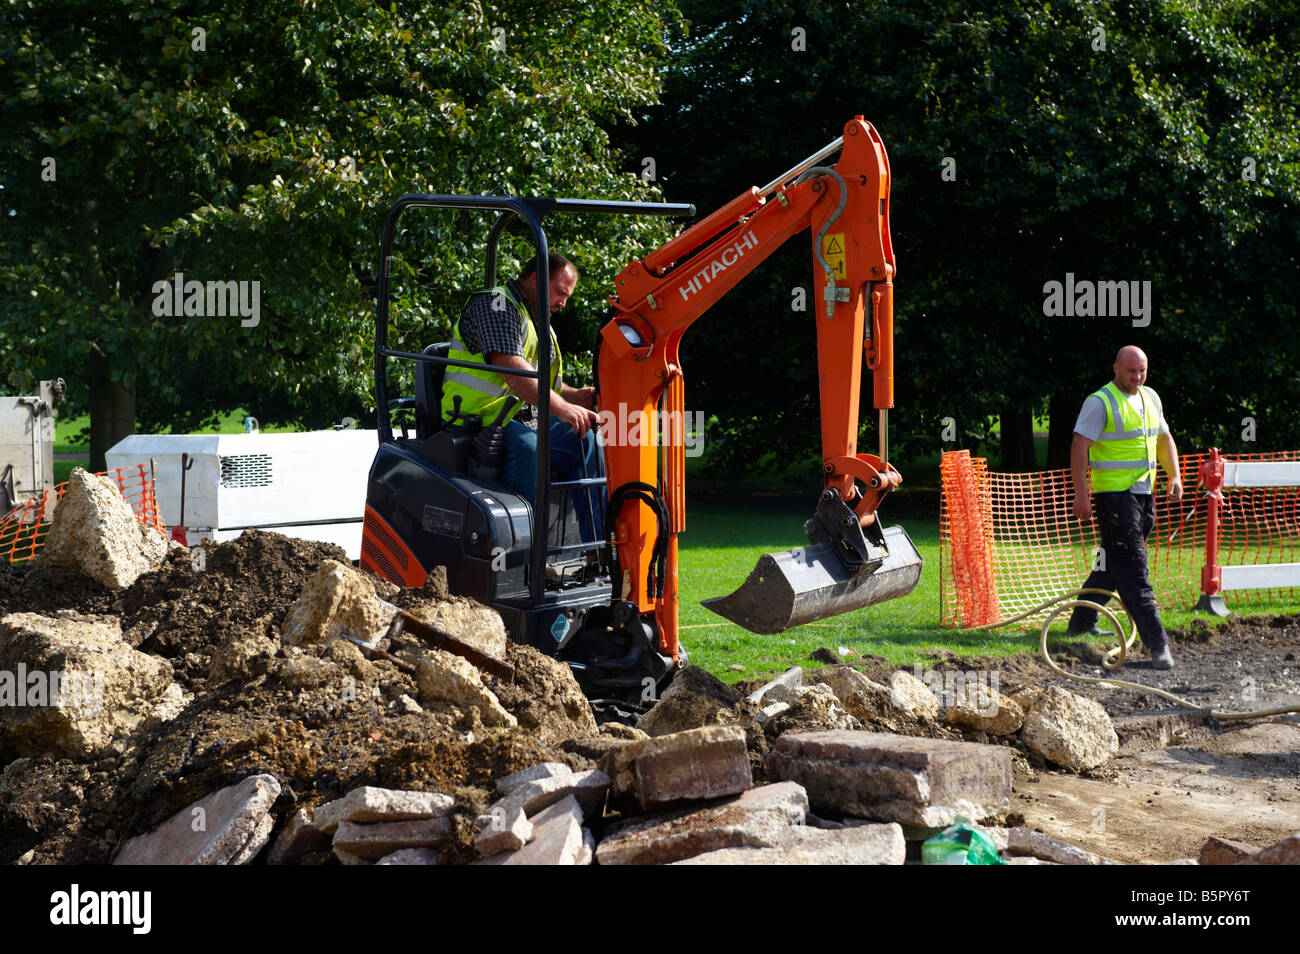 Workers digging with digger machinery Cambridge UK Stock Photo